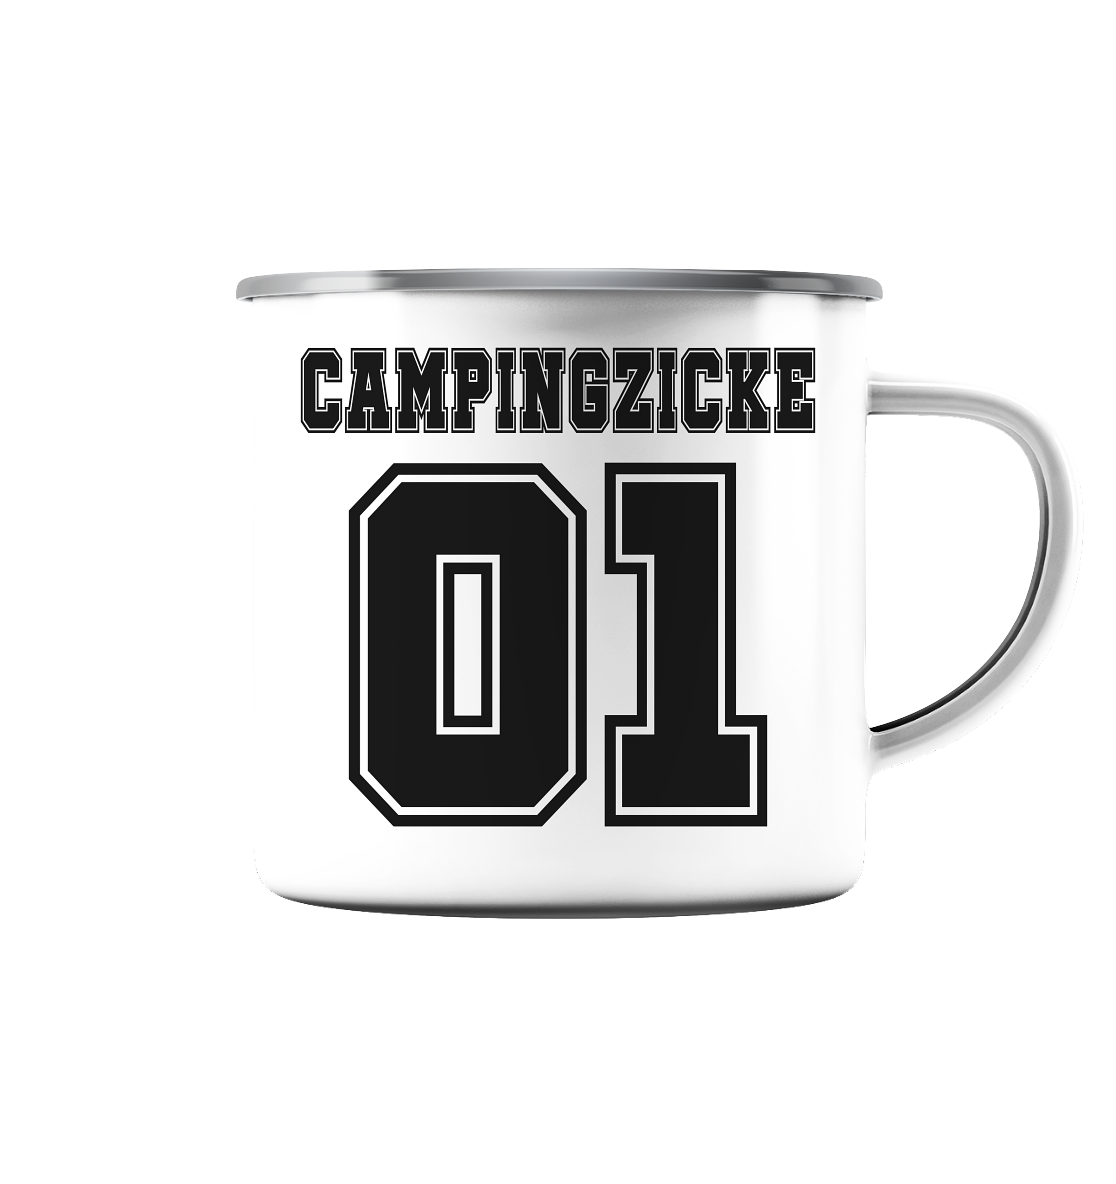 Campingzicke - Emaille Tasse (Silber)